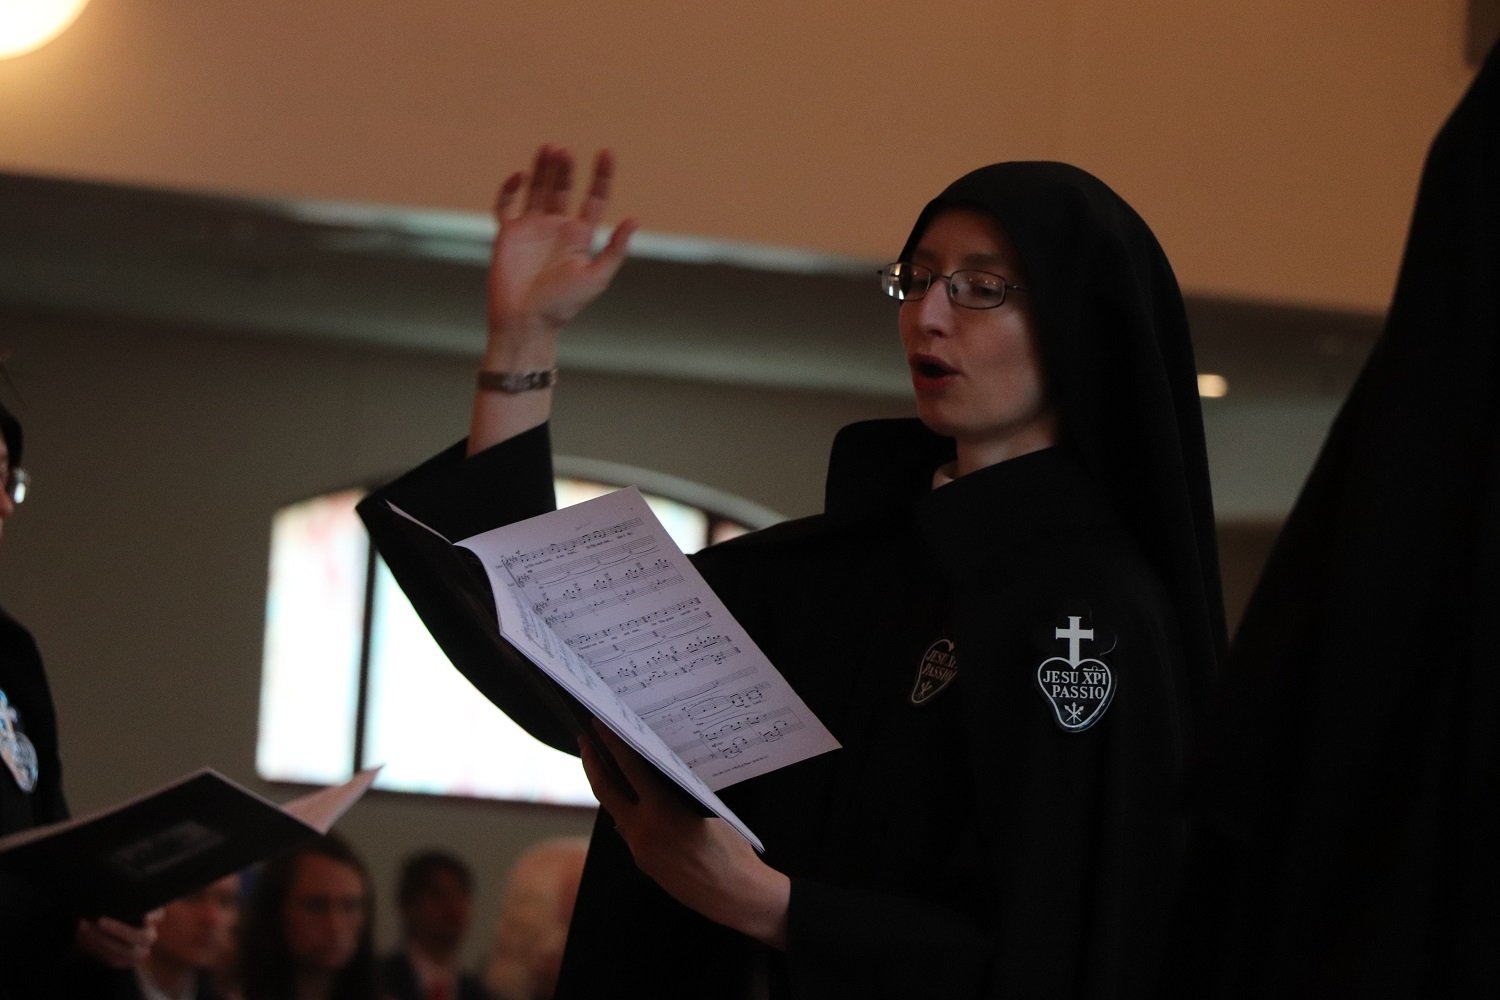  Sr. Cecilia Maria conducts the monastic choir as they sing the beautiful hymn “View Me, Lord, A Work of Thine” 